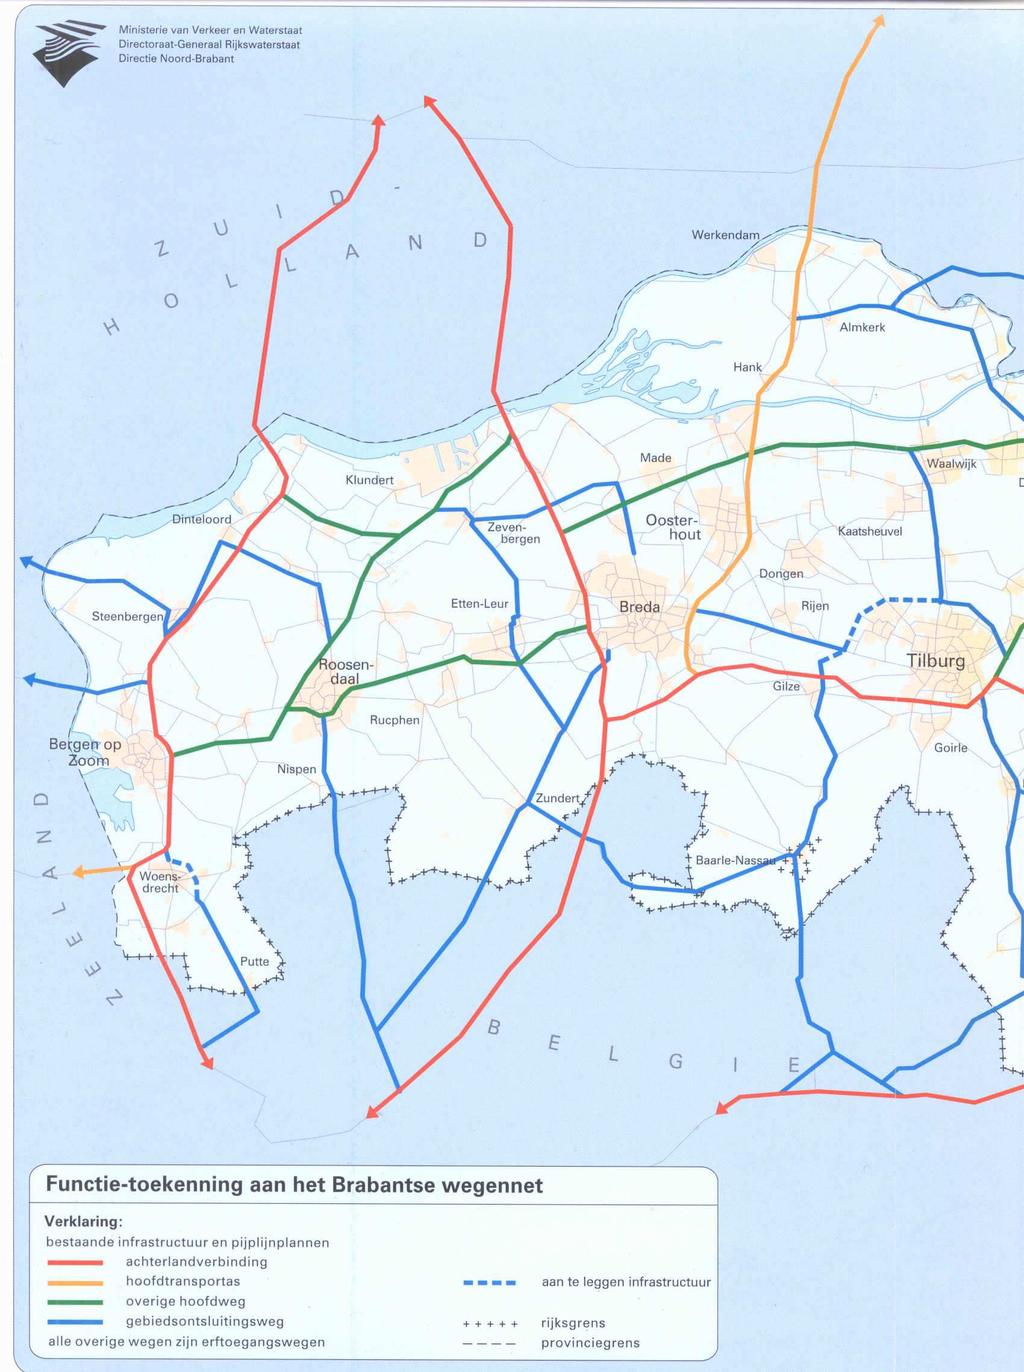 through road (international) through road (national) through road (regional) distributor road Figure 8: Example of road categorizing plan of a Dutch province Noord Brabant 3.